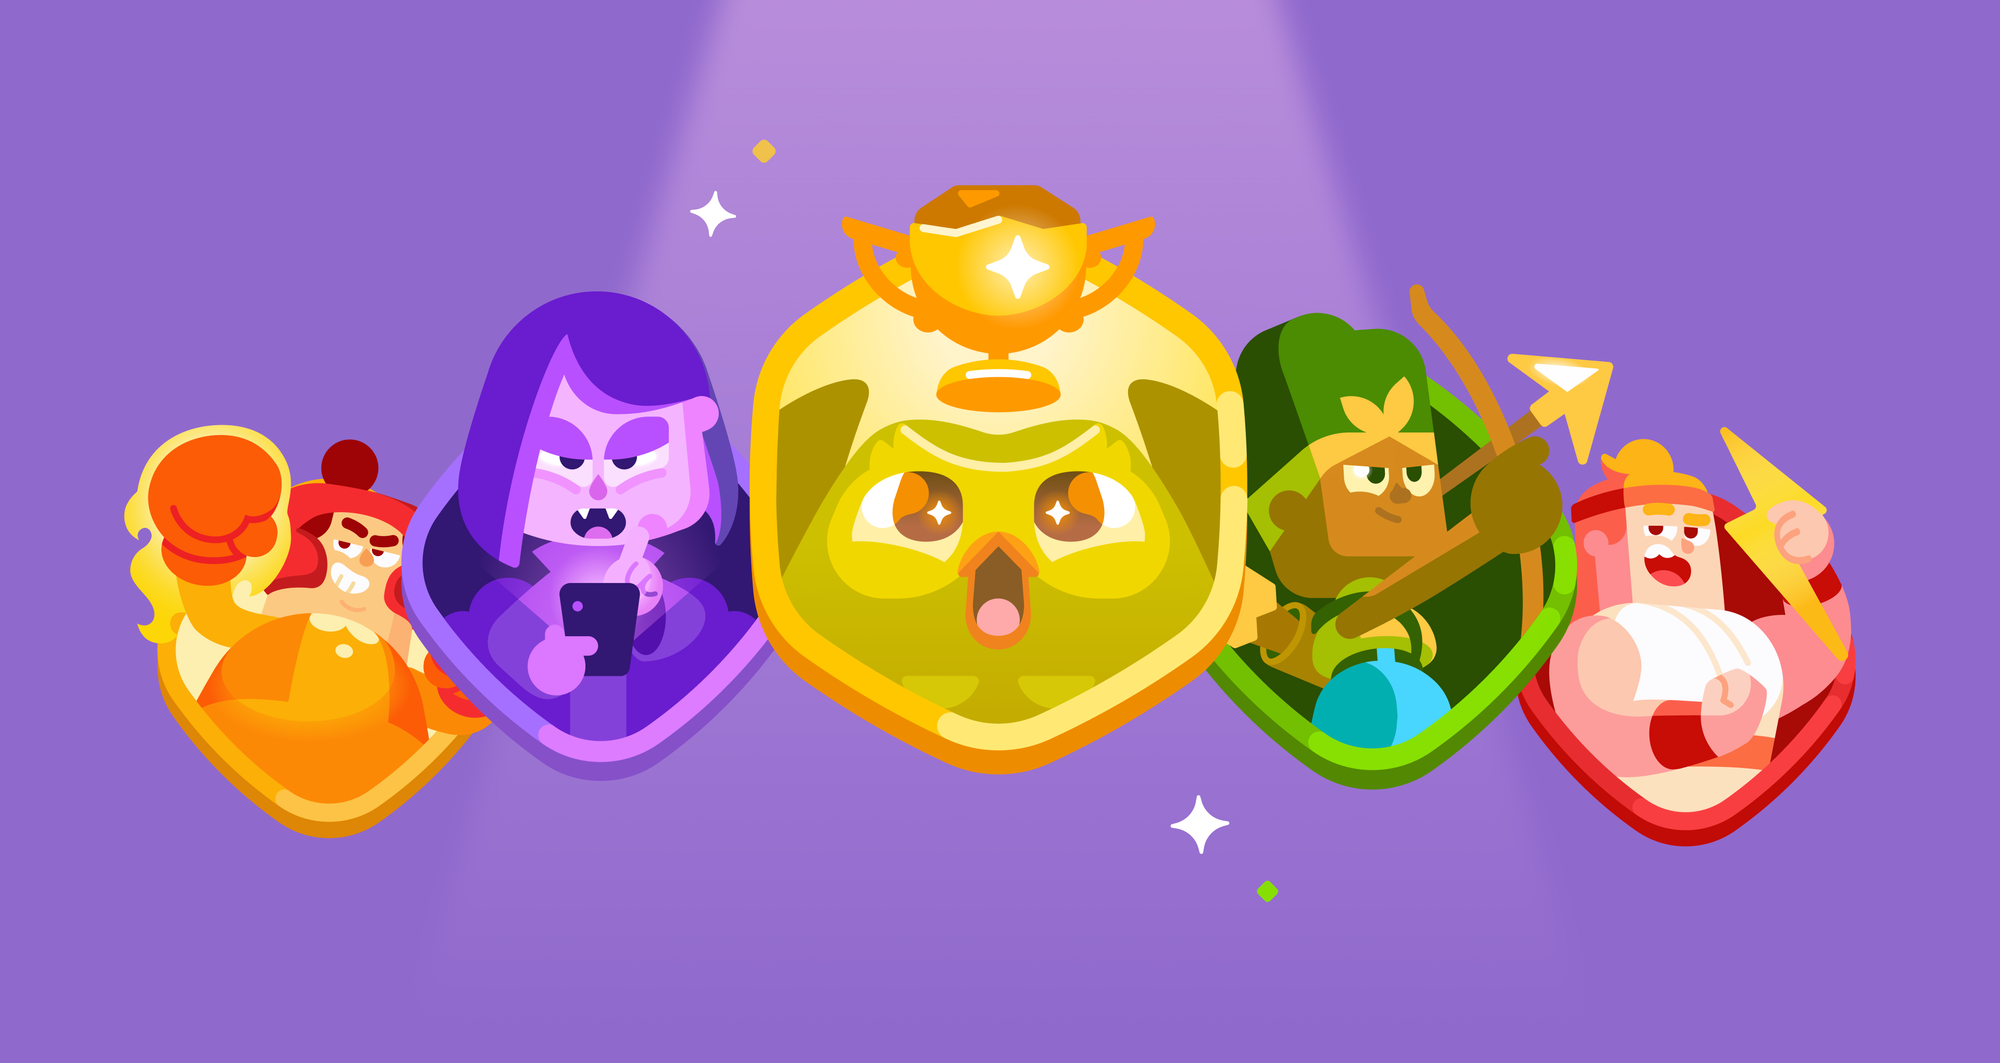 A selection of the new Achievements badges, with all of the world characters representing a different badge.